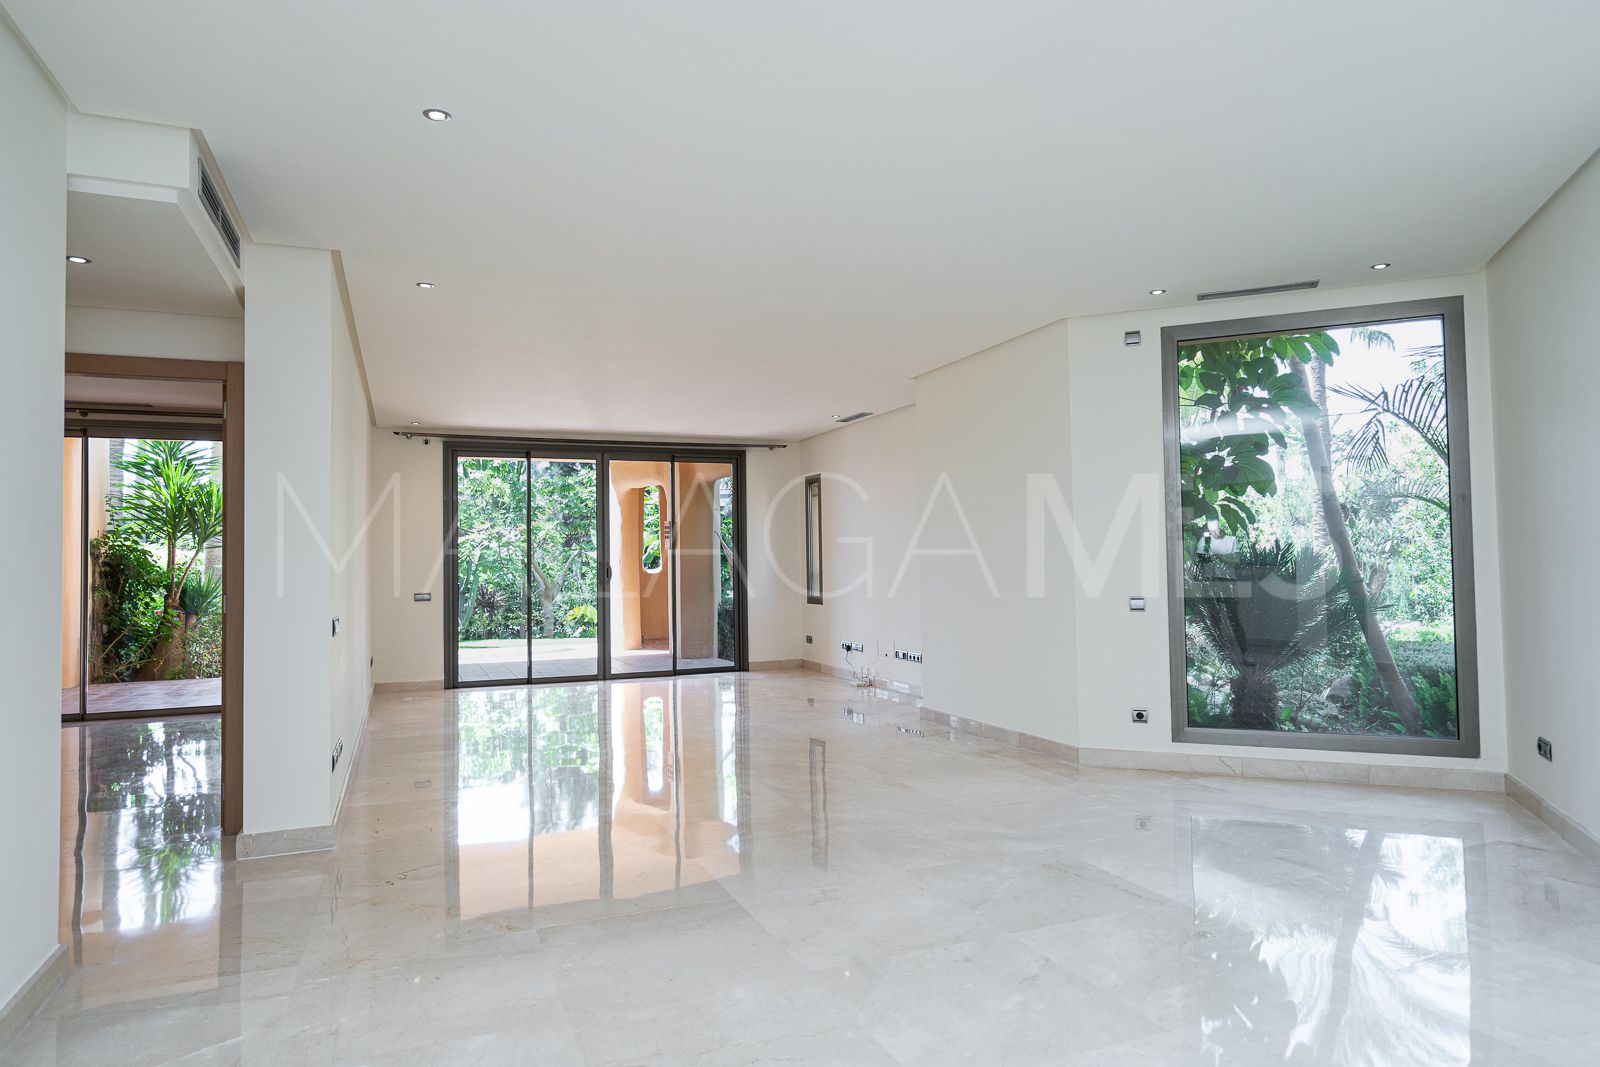 For sale ground floor apartment in Mansion Club with 2 bedrooms